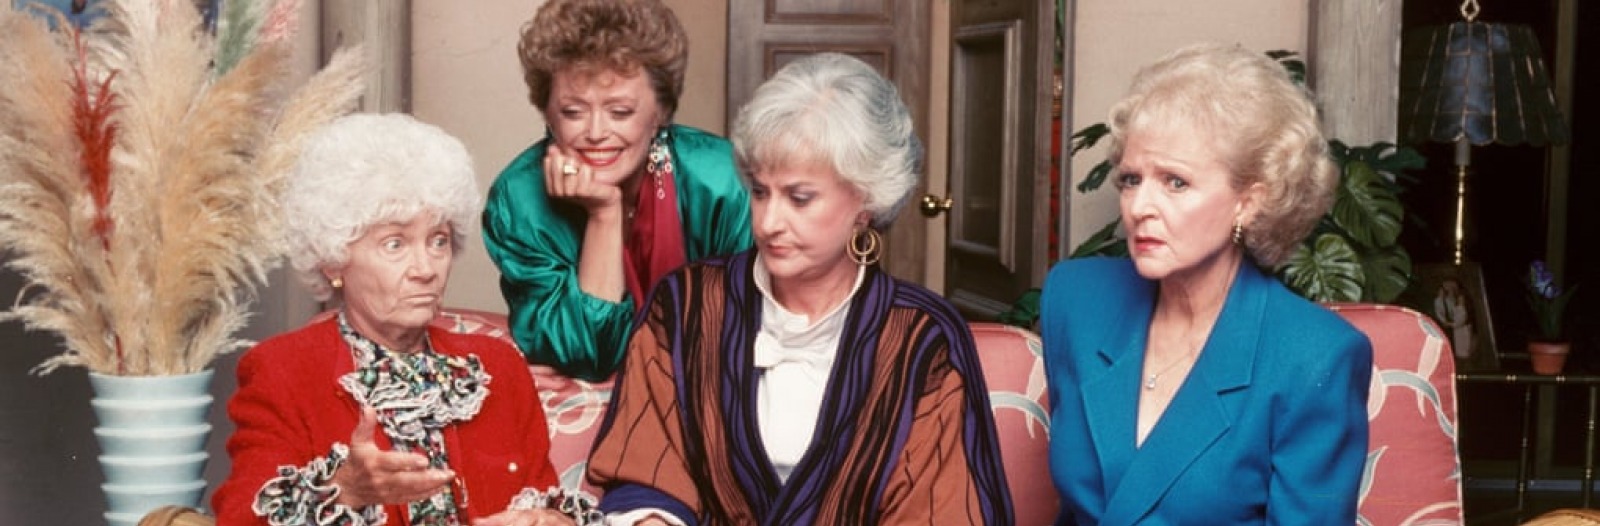 Estelle Getty, Rue McClanahan, Bea Arthur and Betty White in The Golden Girls. Photograph: ABC Photo Archives/Walt Disney Television via Getty Images